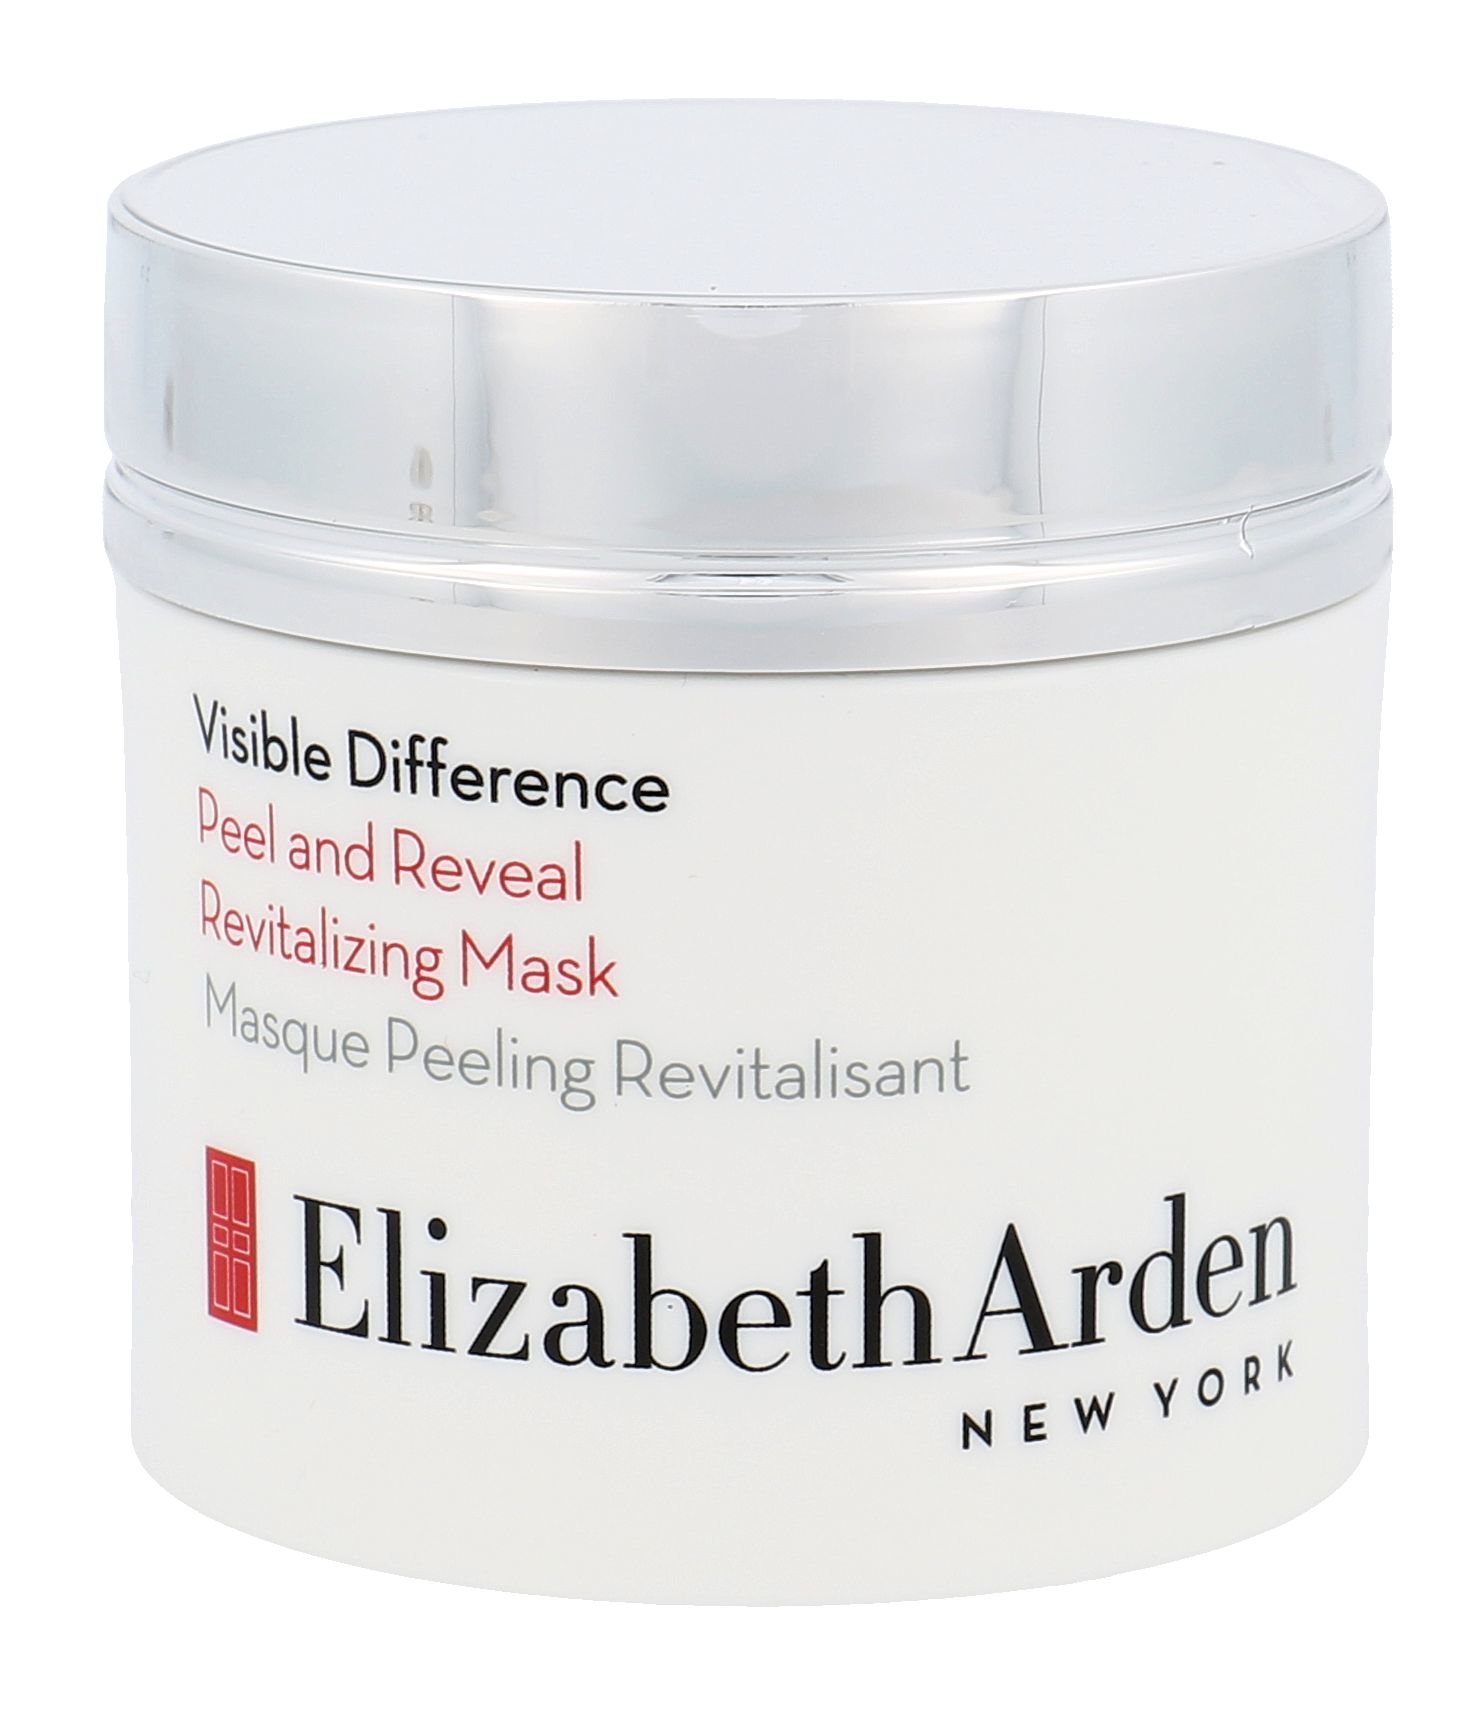 Elizabeth Arden Visible Difference Peel And Reveal 50ml Veido kaukė